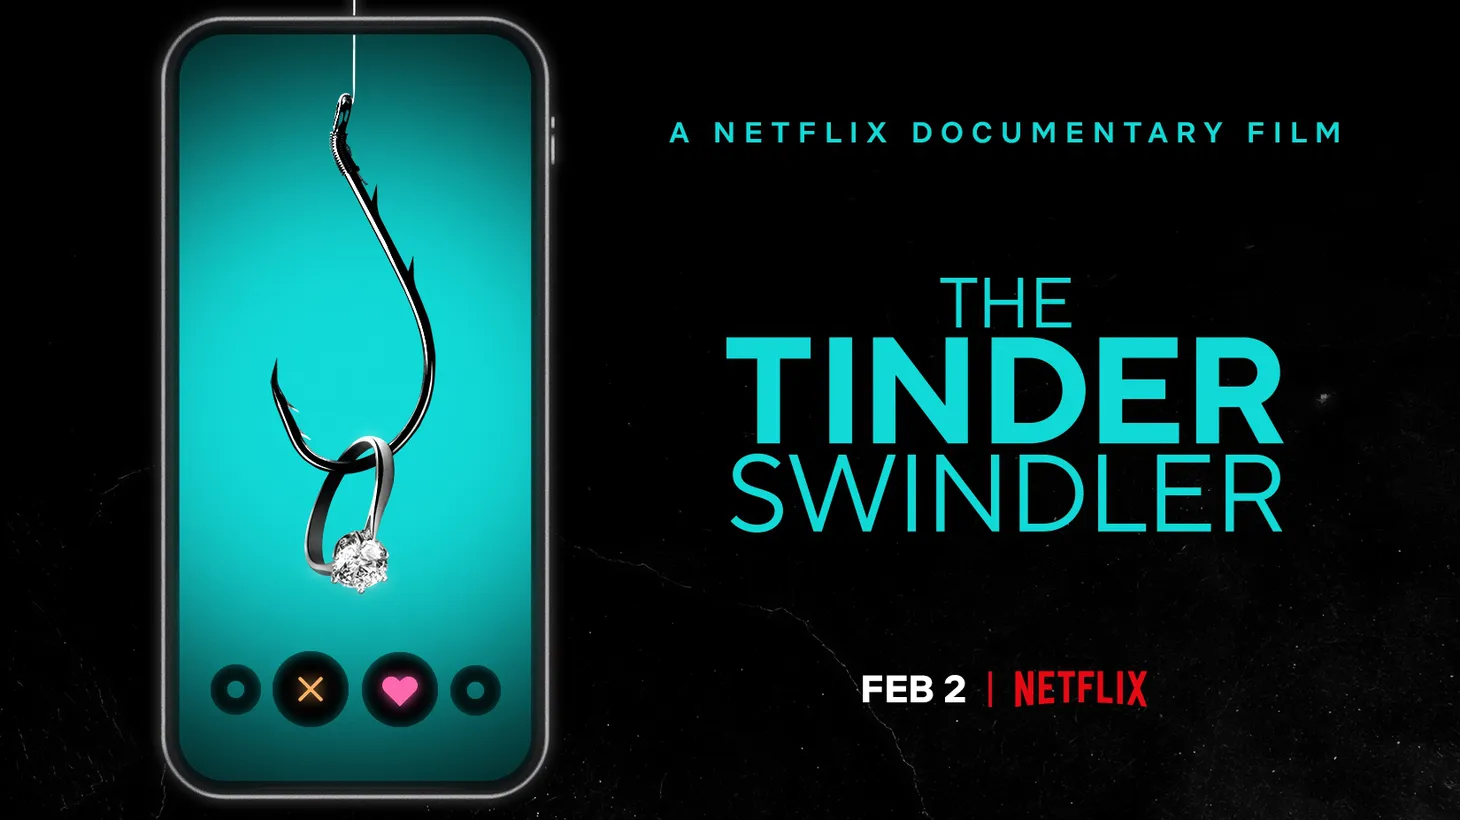 “The Tinder Swindler” is about Simon Leviev, a now 31-year-old Israeli man who used a dating app to make women fall in love with him, then manipulated them into sending him millions of dollars so he could “escape his enemies” and continue his grandiose lifestyle.